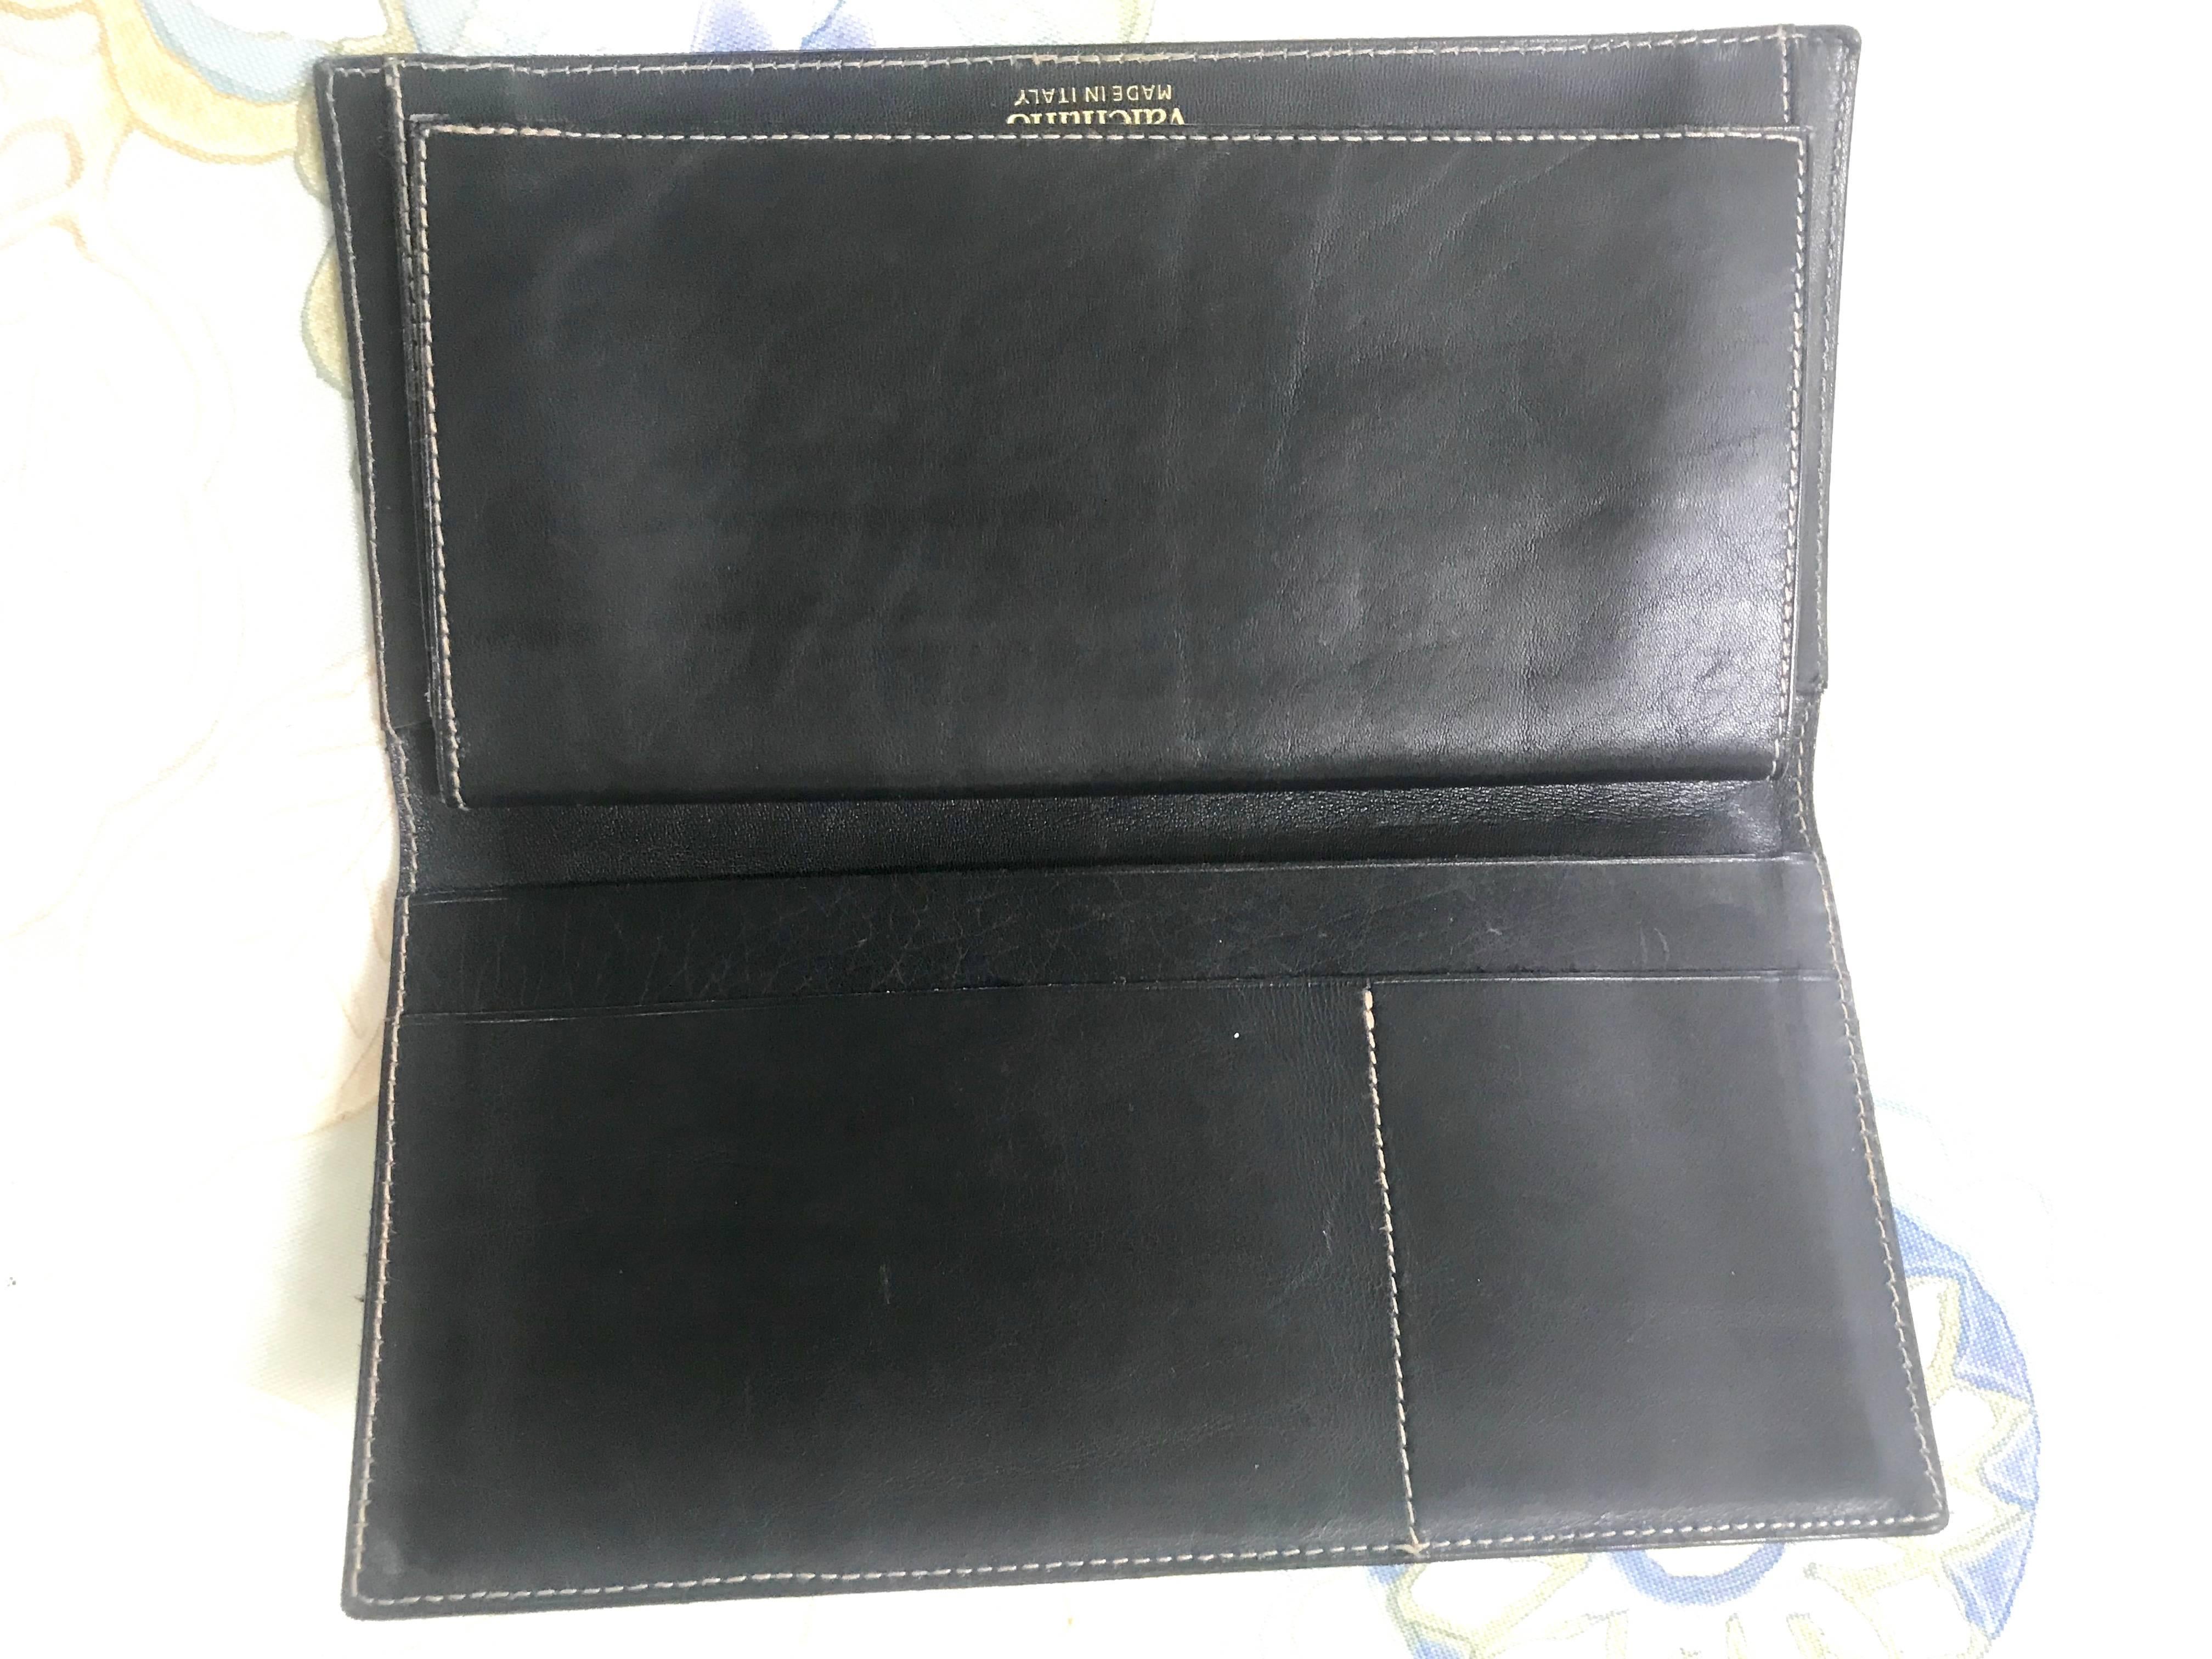 Vintage Valentino black leather long wallet with beige stitches and V logo. 1